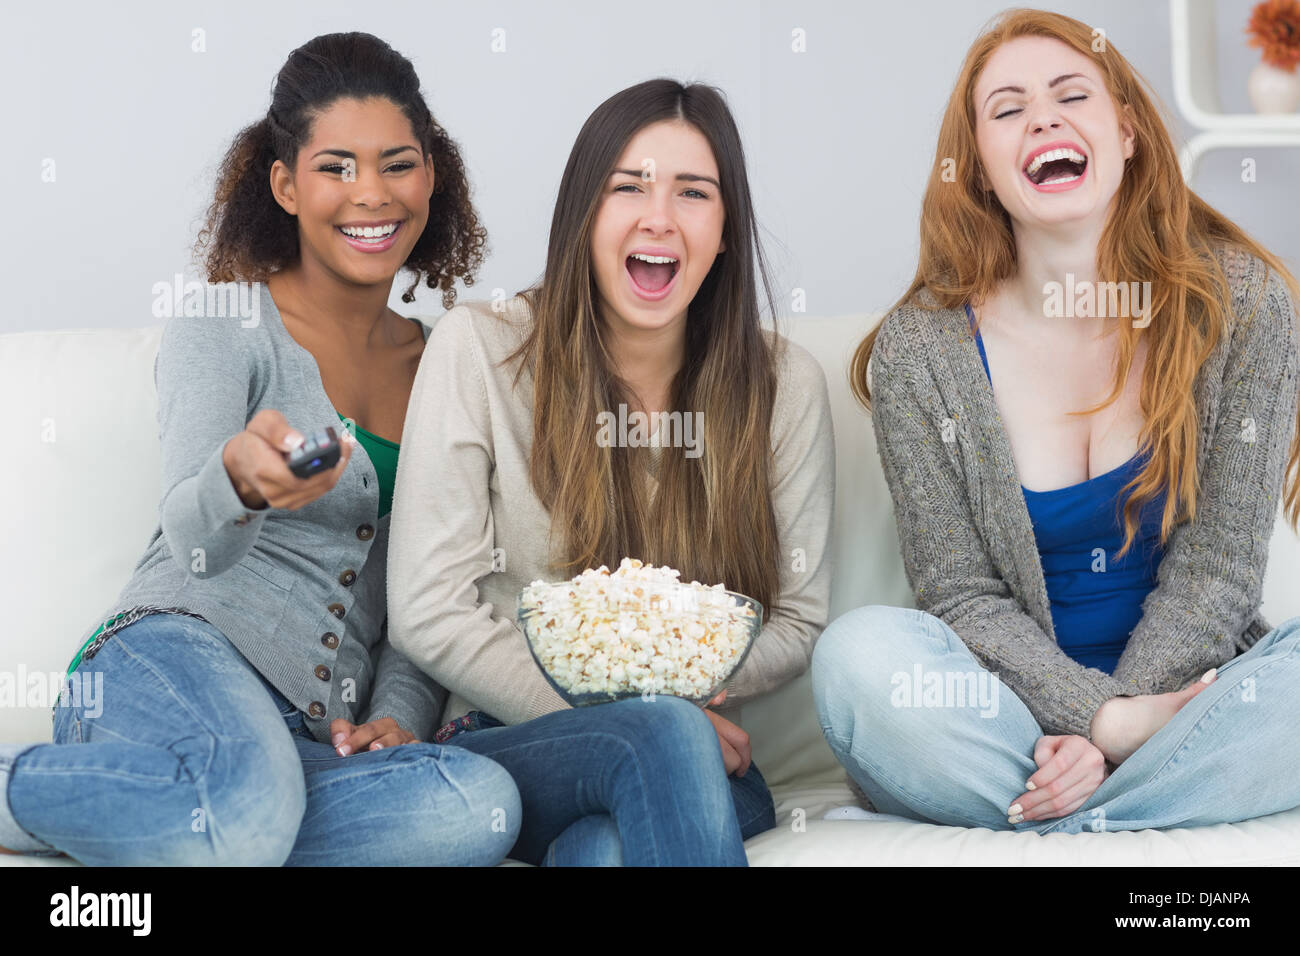 Cheerful friends with remote control and popcorn bowl on sofa Stock Photo